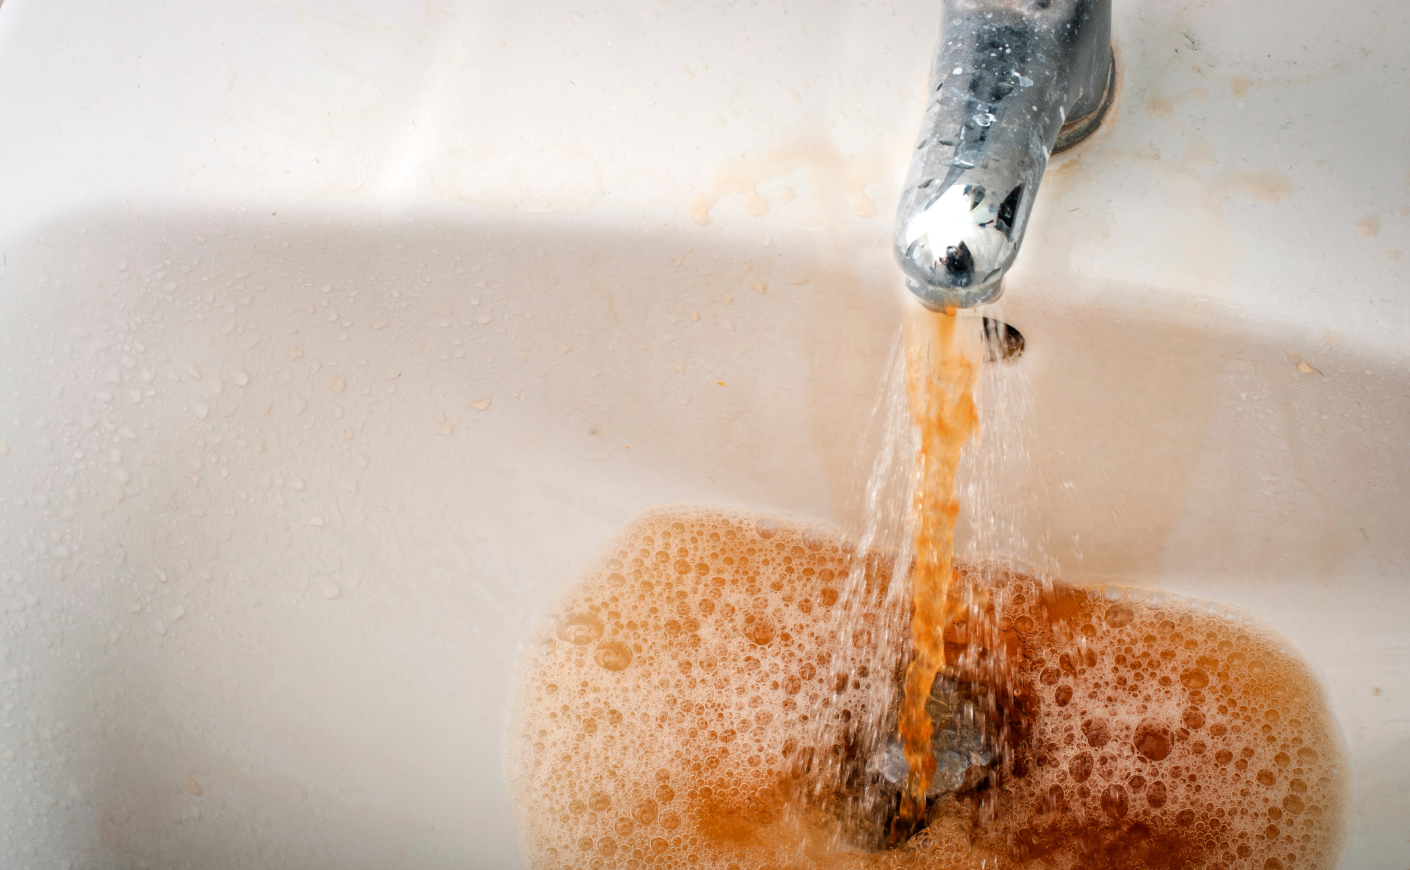 Brown water coming from faucet